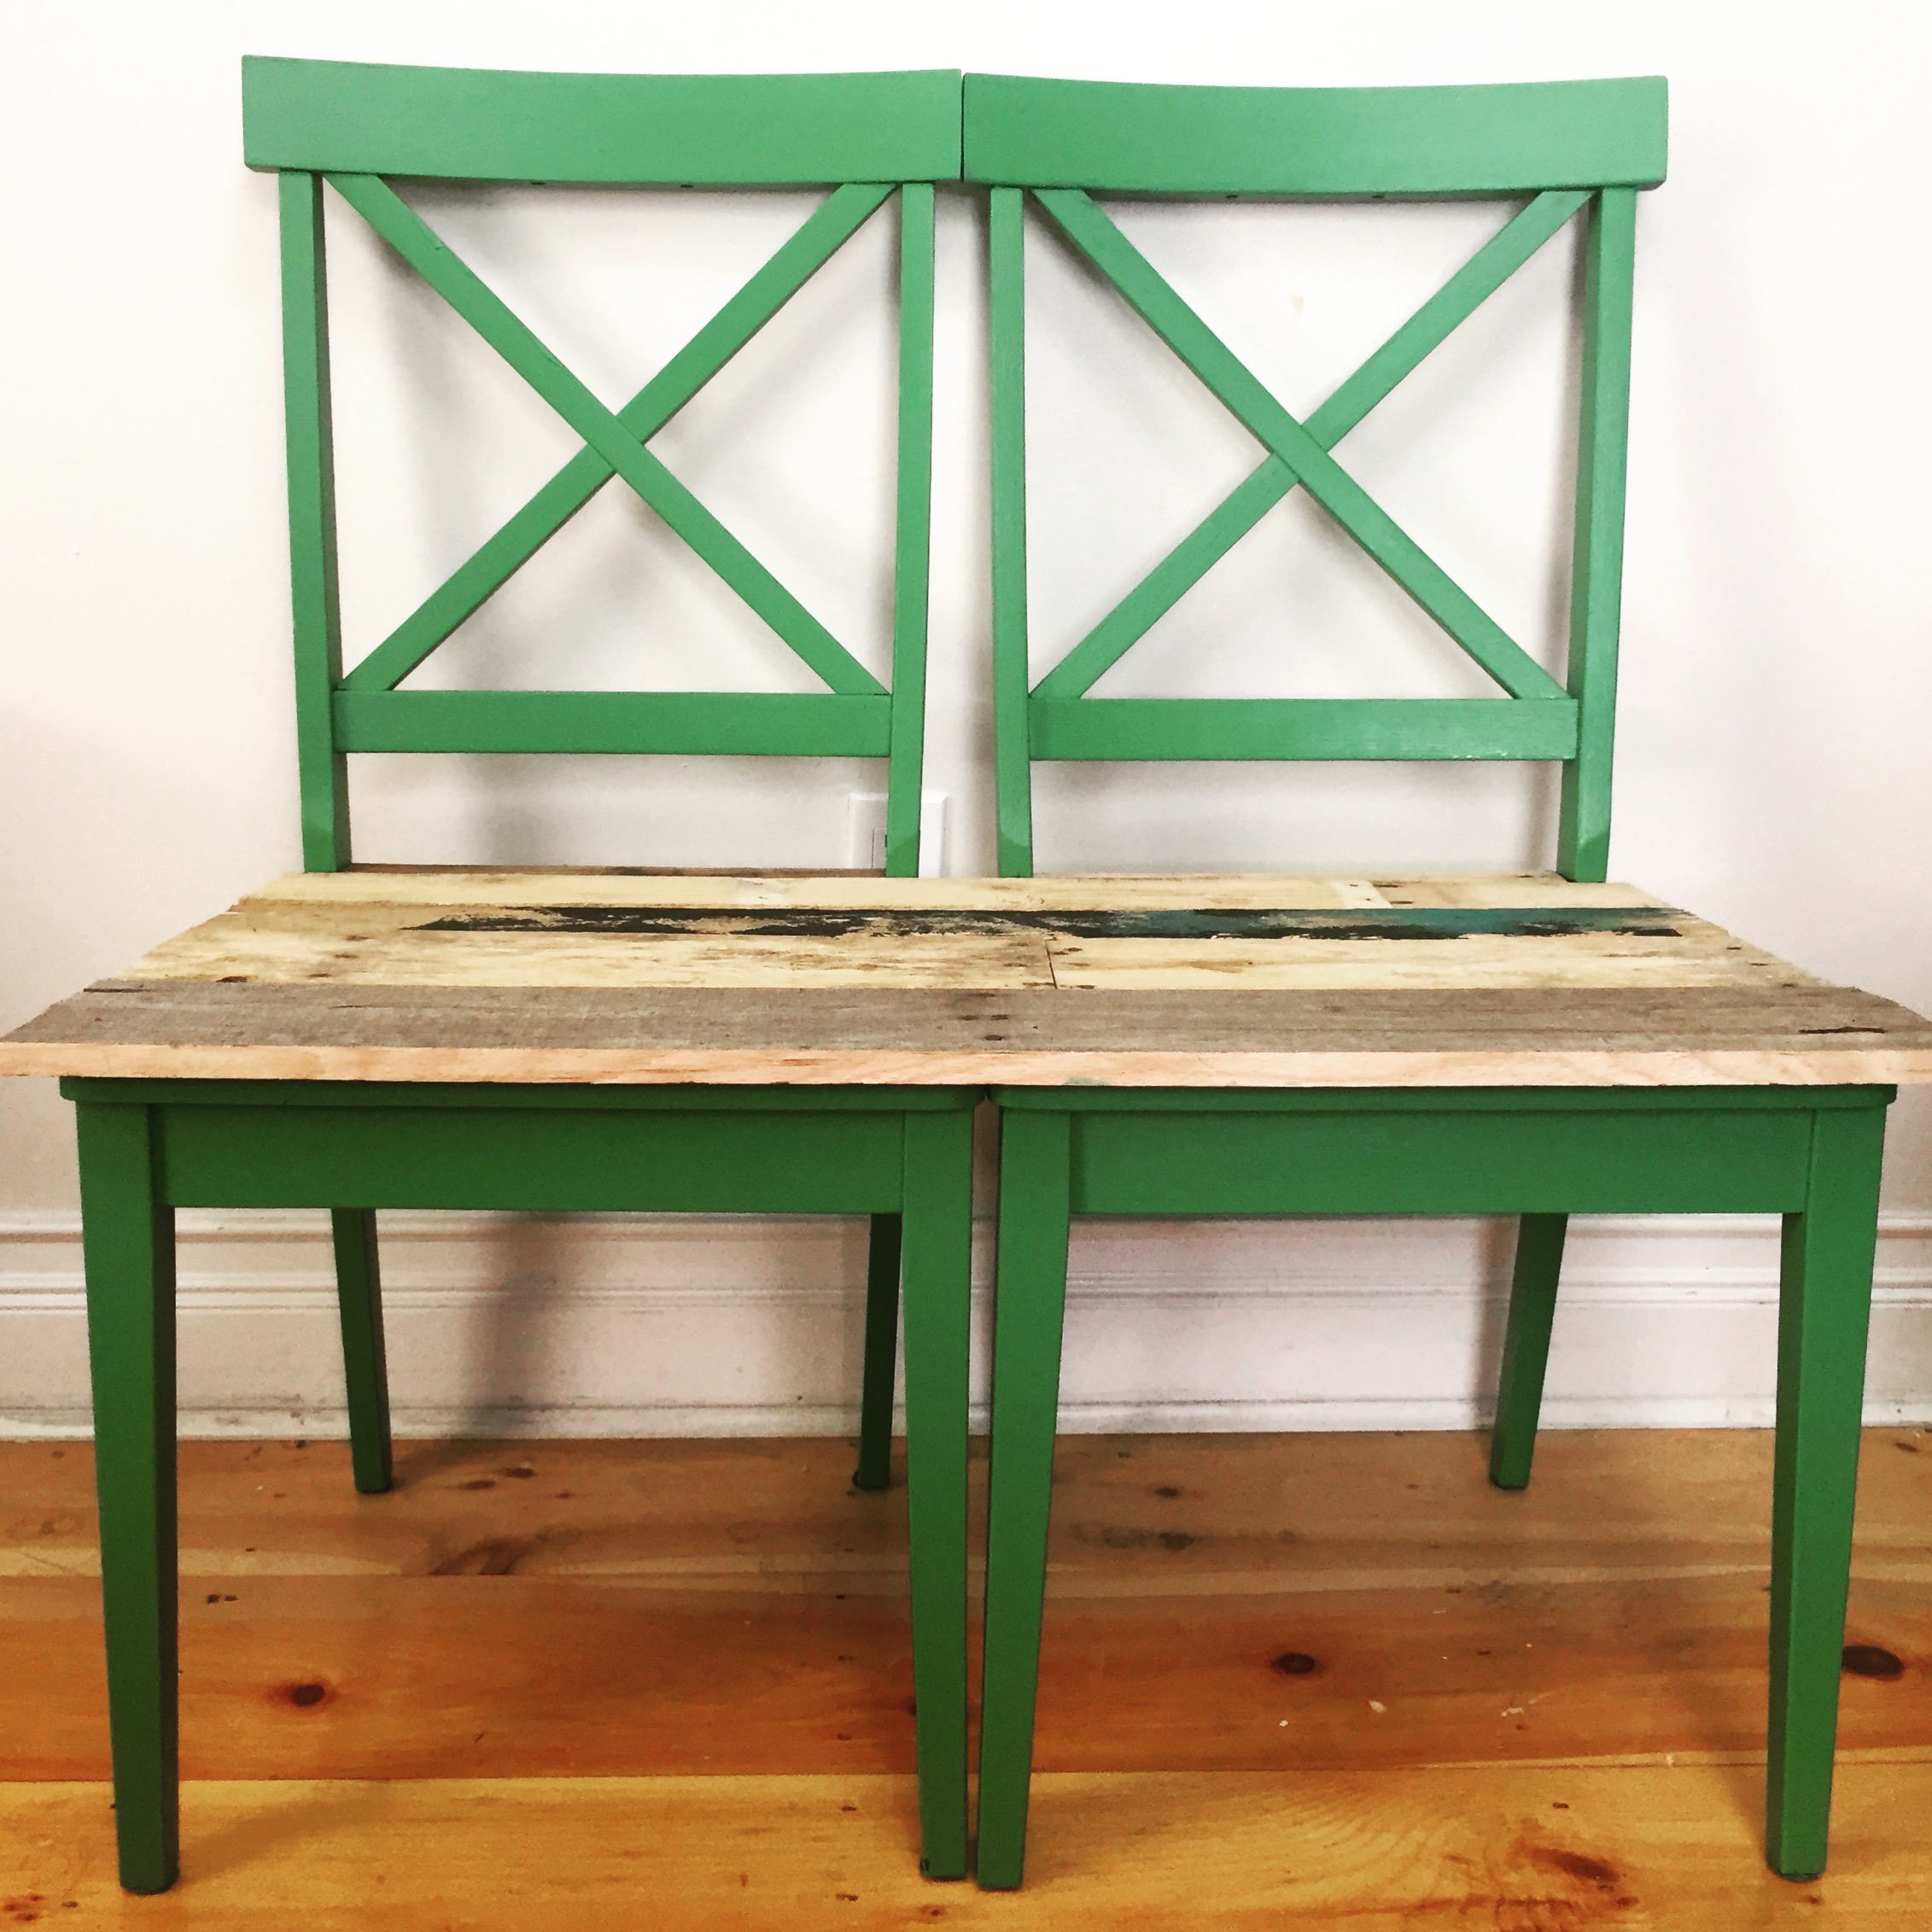 Chair pallet bench upcycle MyFixitUpLife green